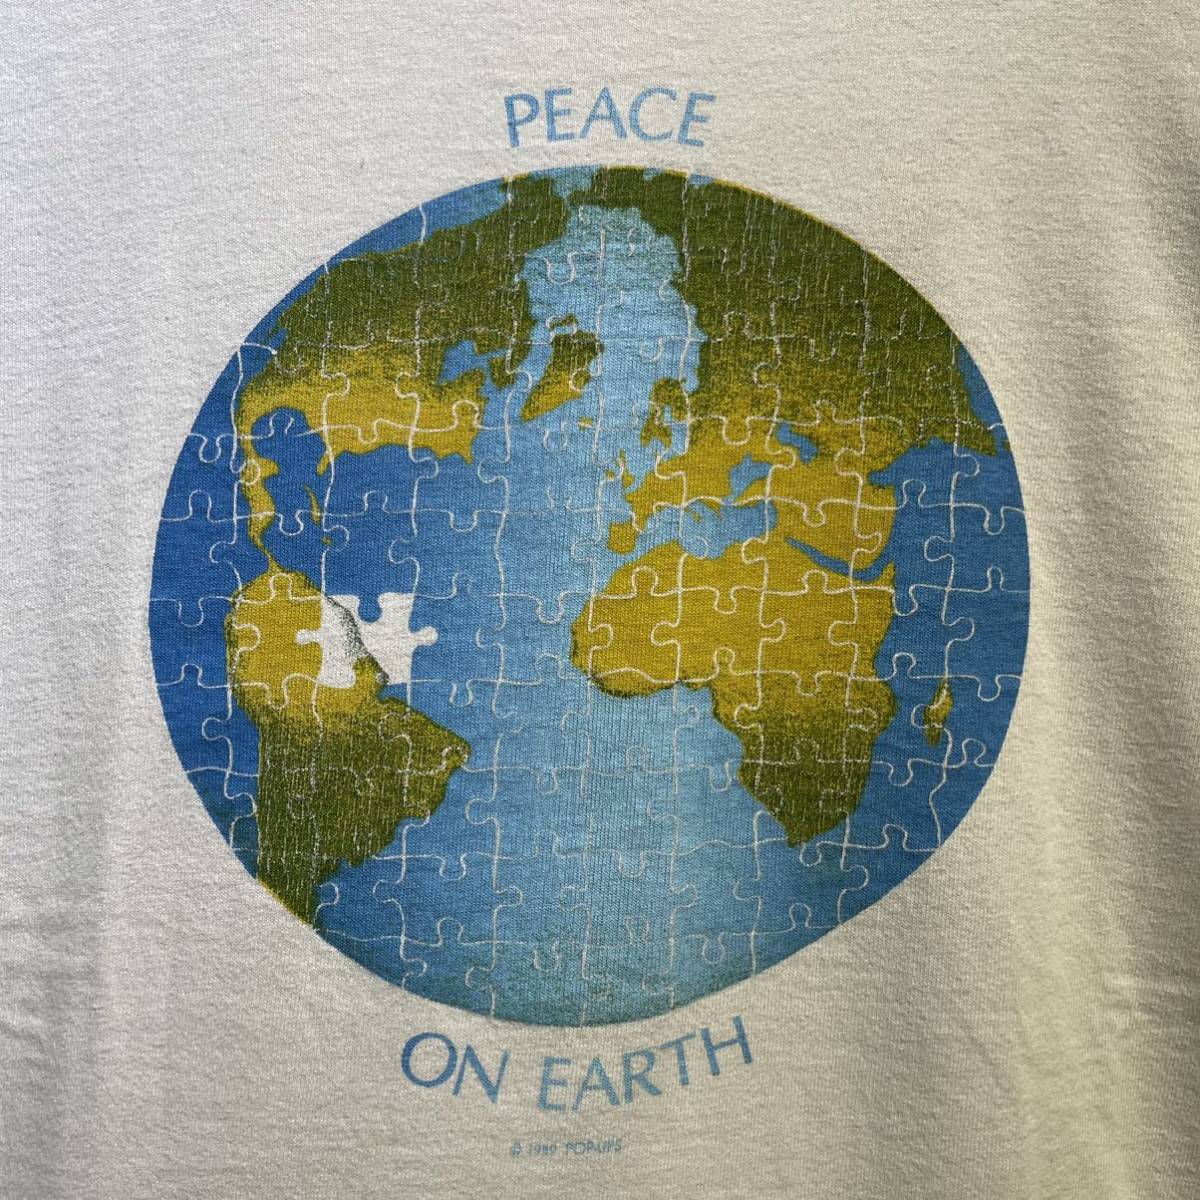 ‘89 “PEACE ON EARTH” Tシャツ USA製 L ヴィンテージ fruit of the loom 80s / アート ムービー バンド 企業 hanes patagonia levis 90s_画像4